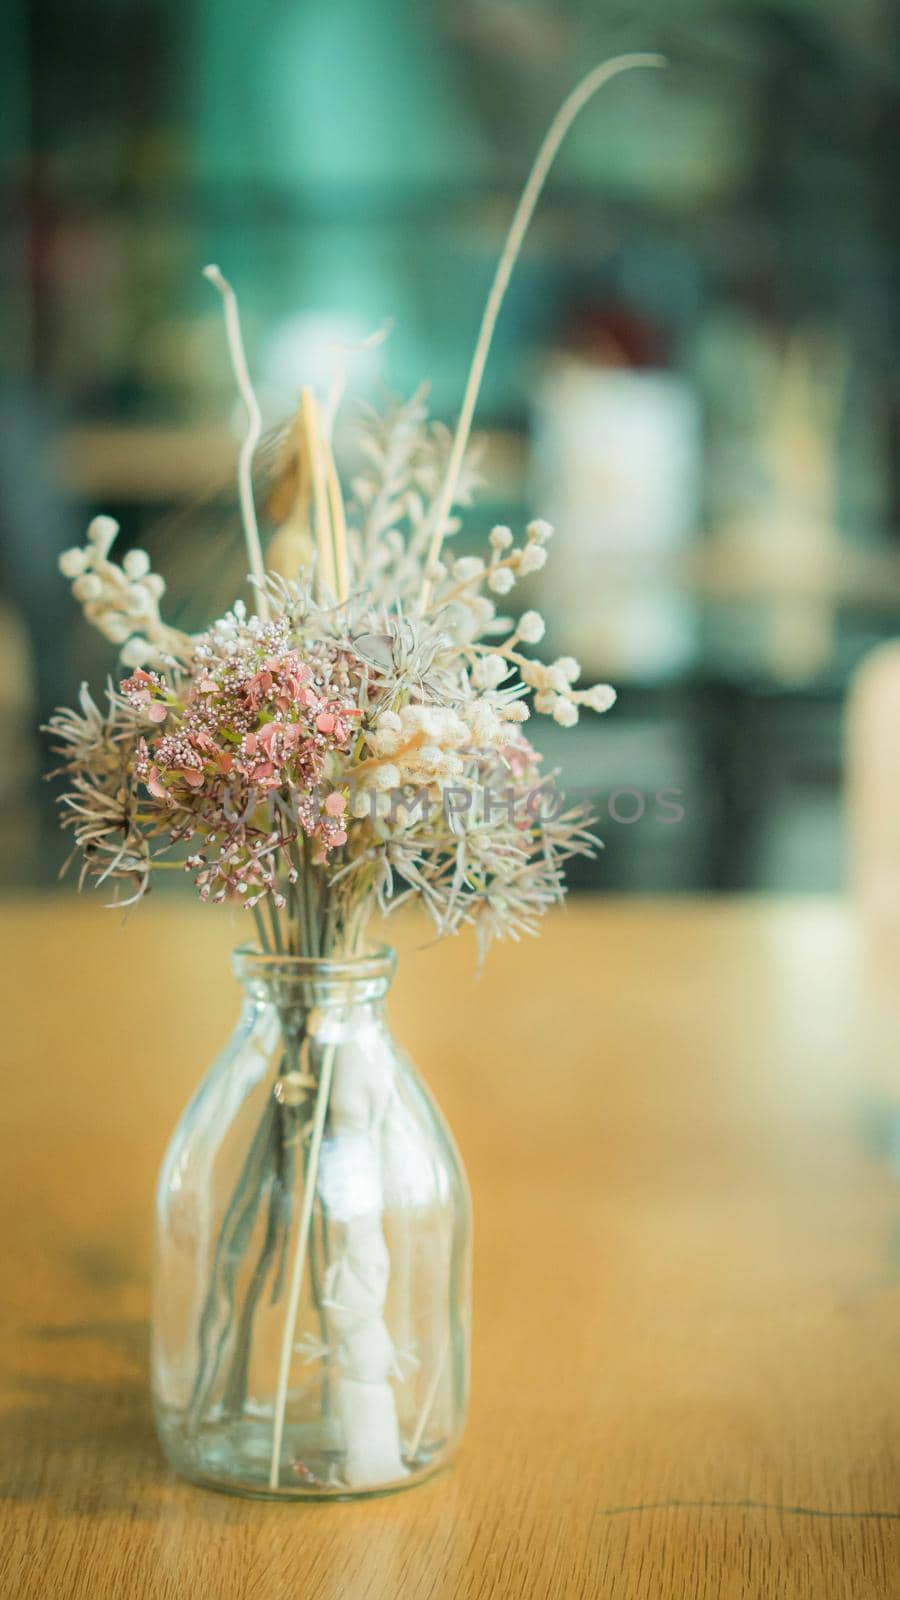 Bunch of dried flowers in a glass vase on wooden table. by Petrichor